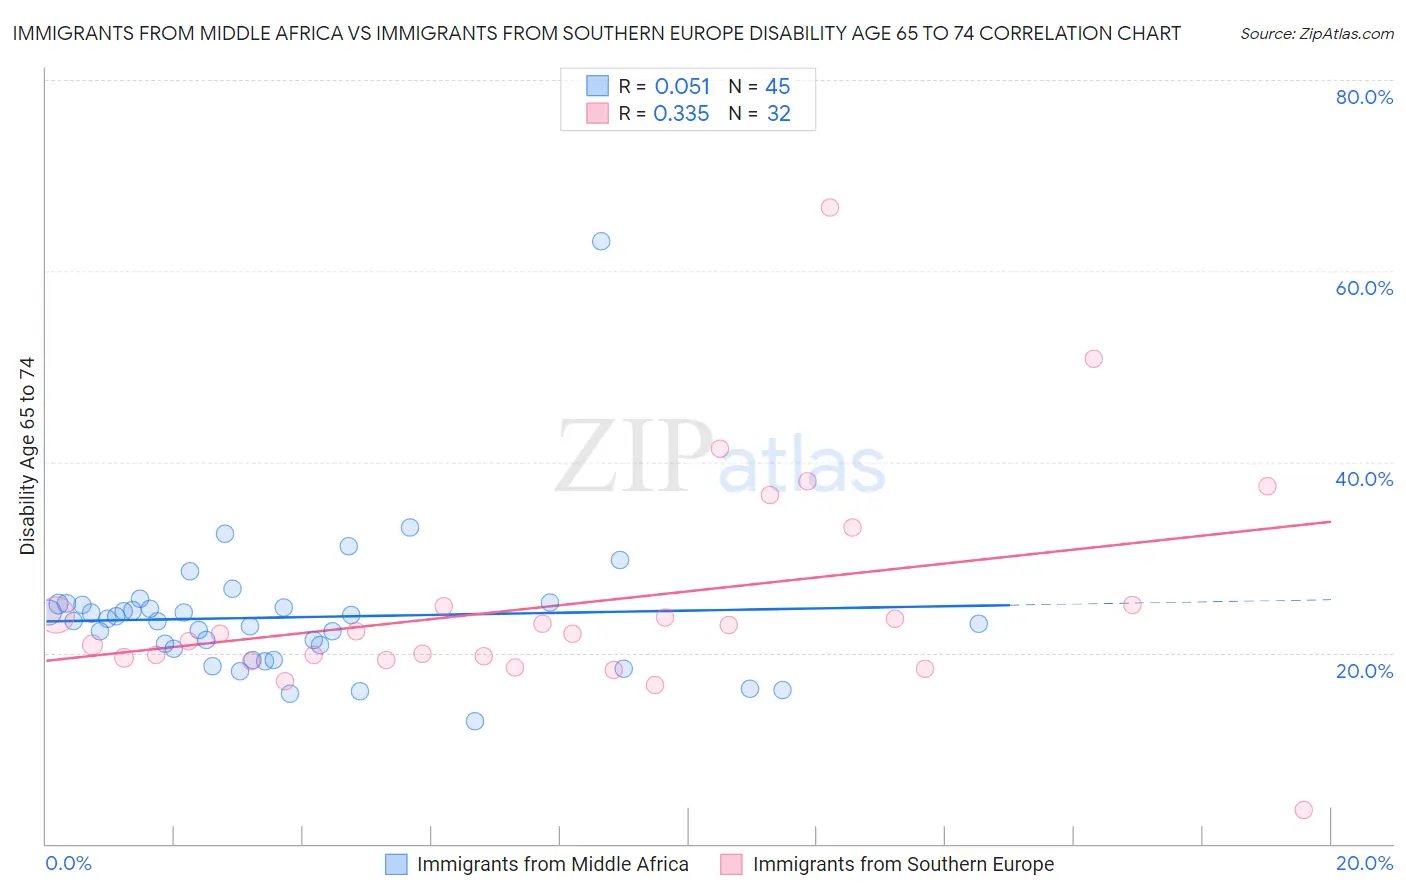 Immigrants from Middle Africa vs Immigrants from Southern Europe Disability Age 65 to 74